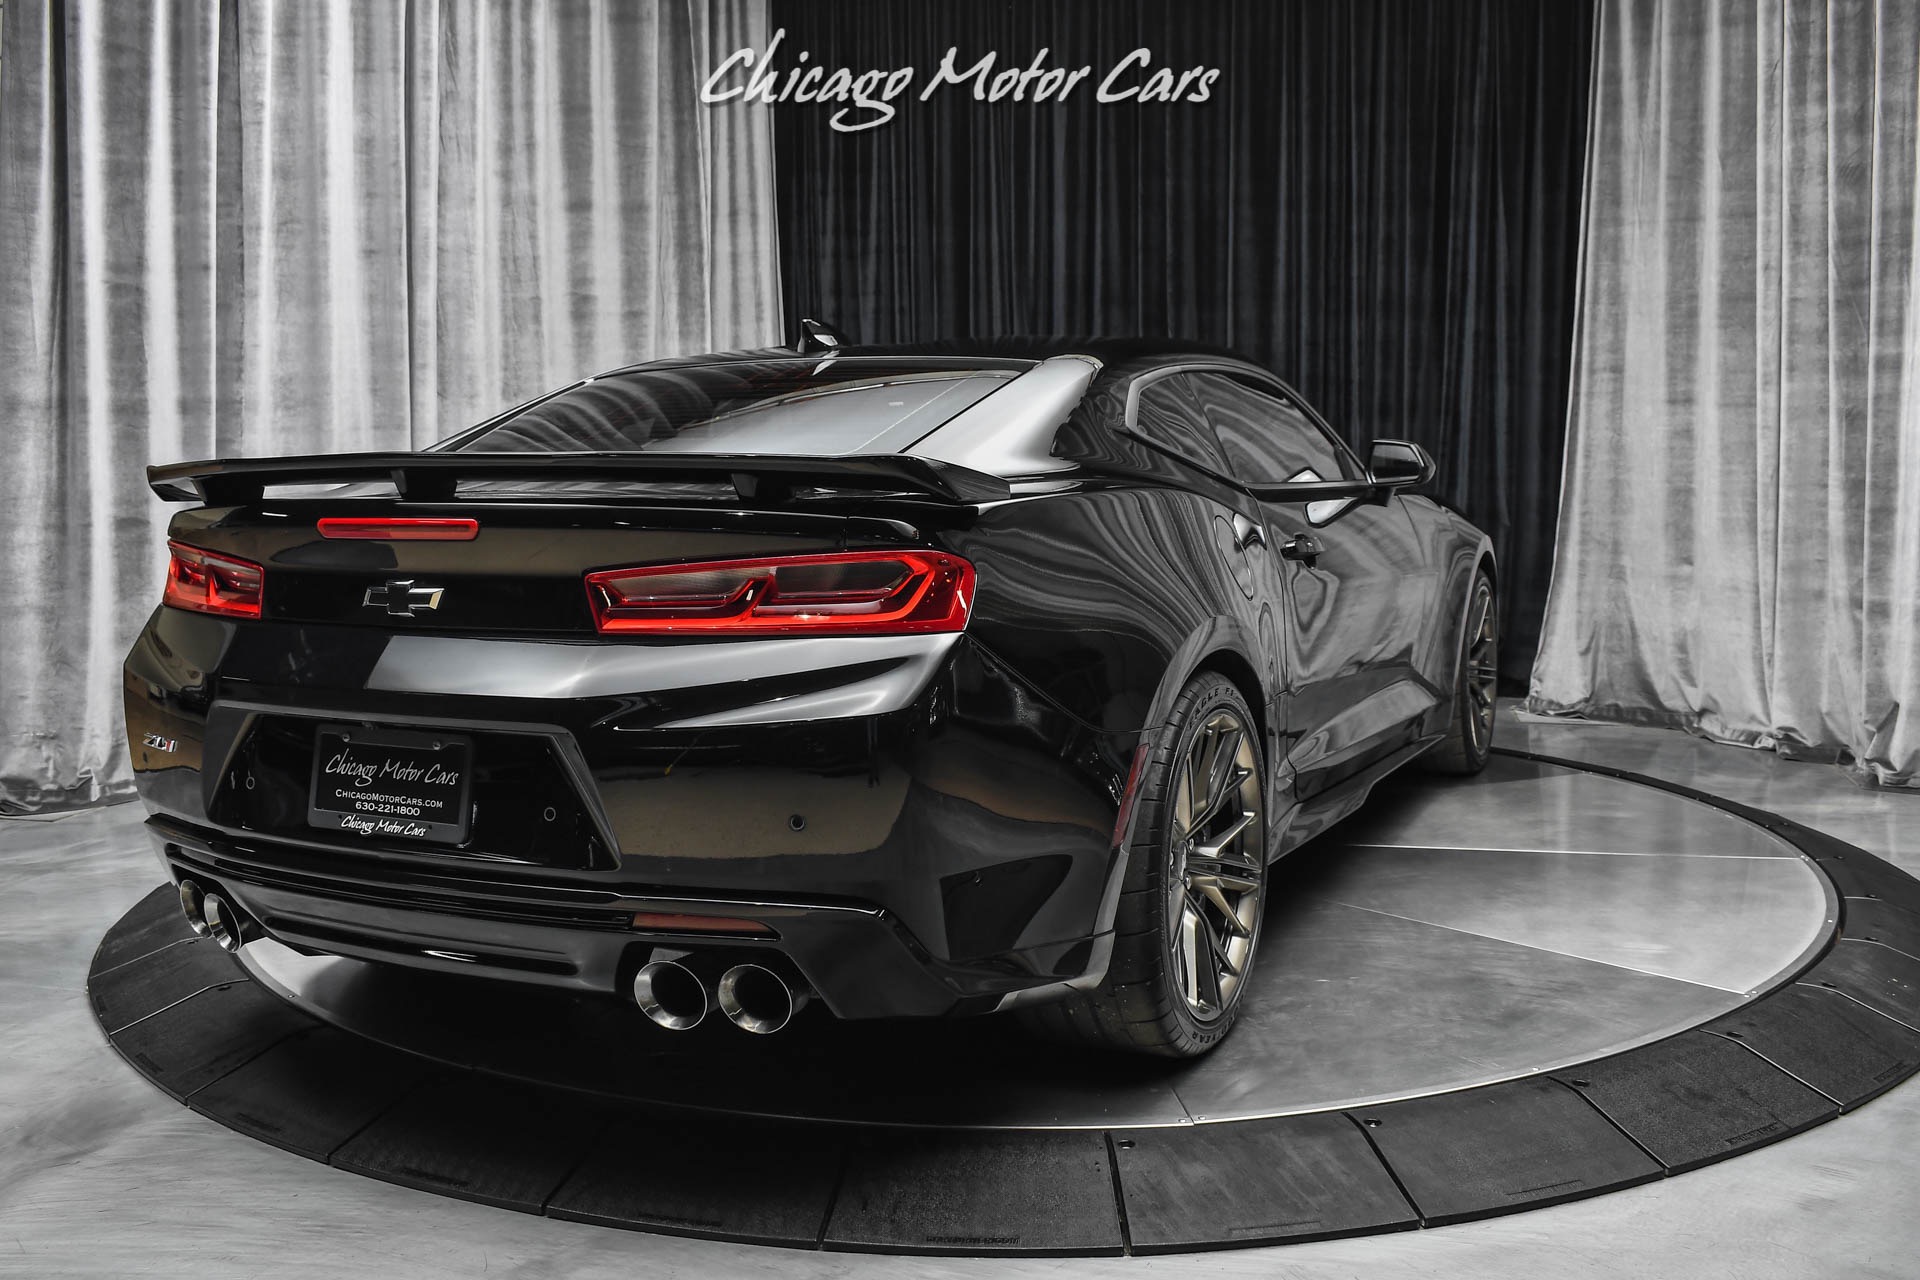 Used-2017-Chevrolet-Camaro-ZL1-Coupe-10-SPEED-AUTOMATIC-TRANS-ONLY-7500-MILES-62L-SUPERCHARGED-V8